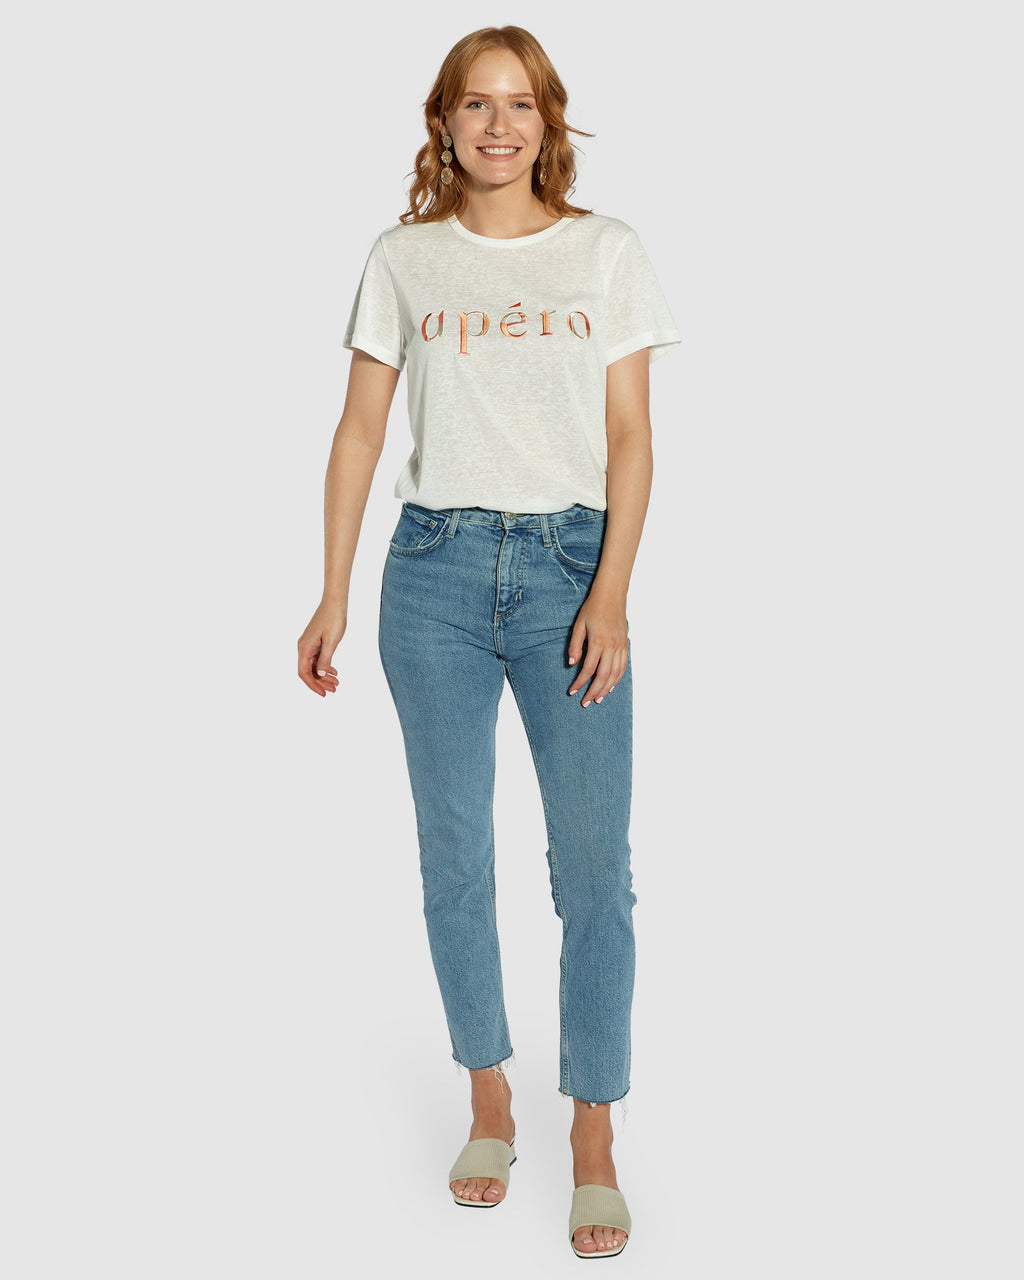 Apero Marble Emroided Femme Tee in White/Multi